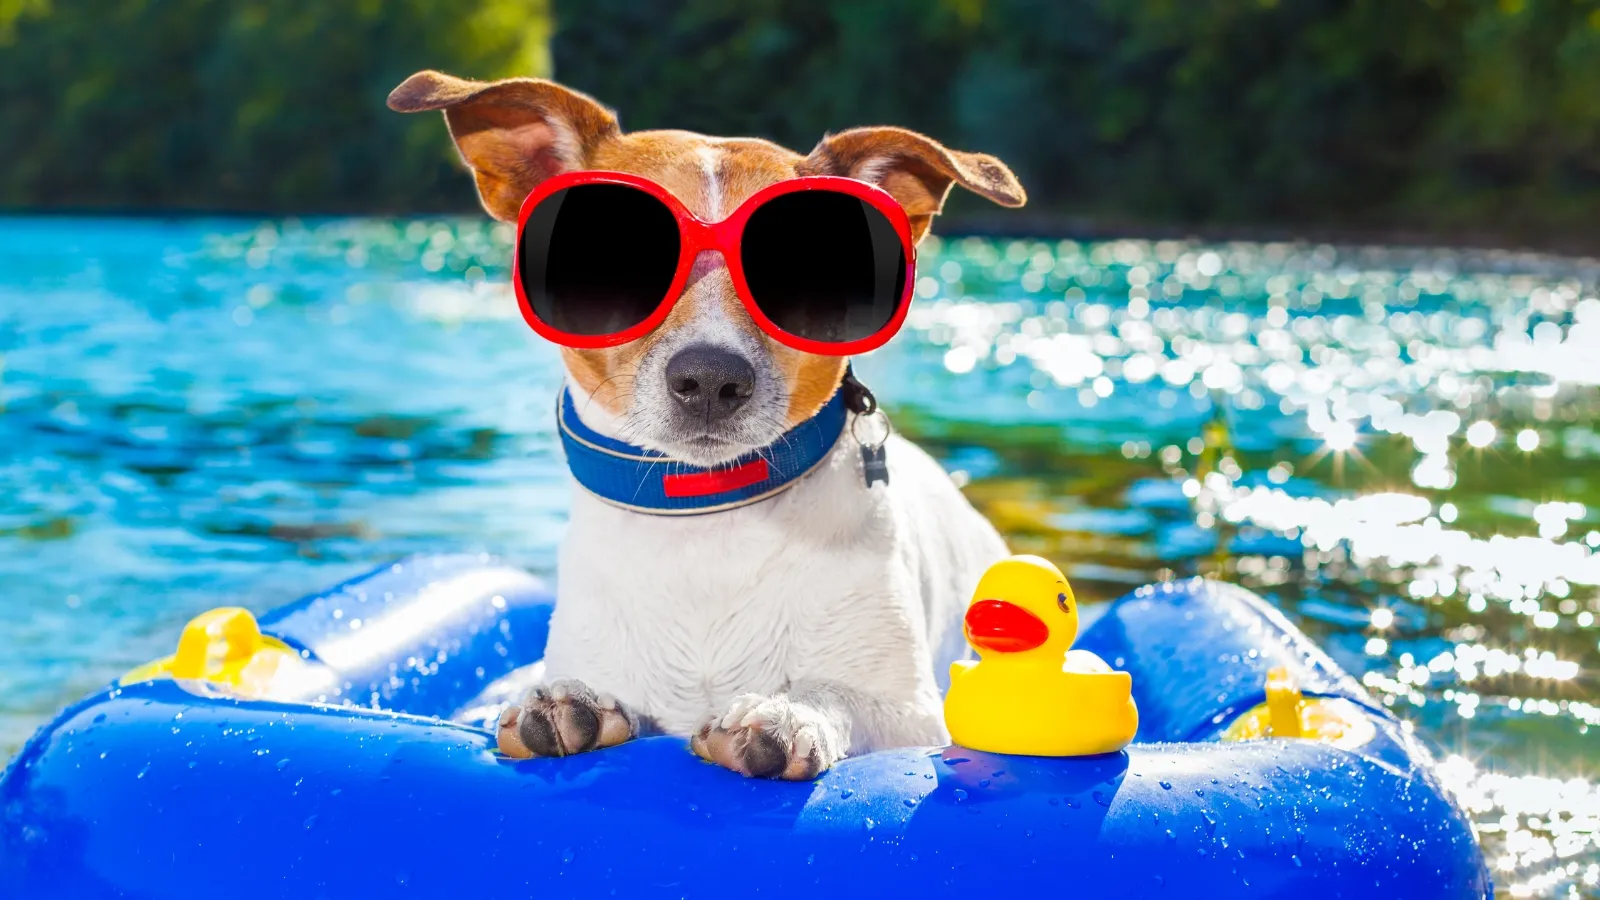 Dog Pool and Play: An Example of Tech-Enhanced Amenities